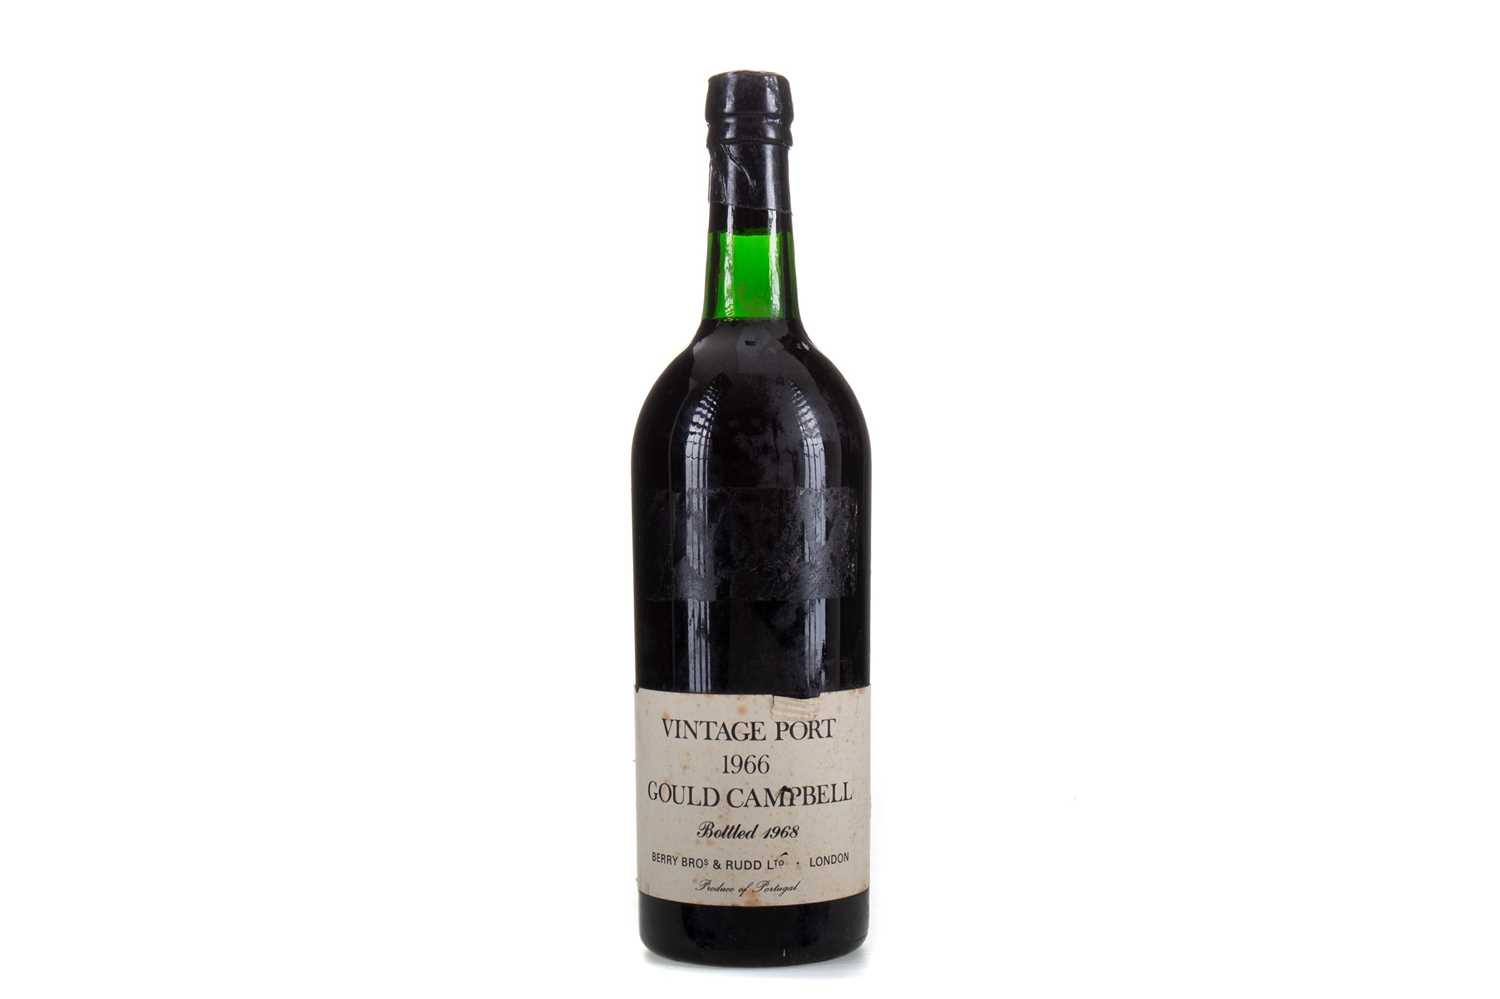 Lot 40 - GOULD CAMPBELL 1966 VINTAGE PORT BOTTLED BY BERRY BROS & RUDD